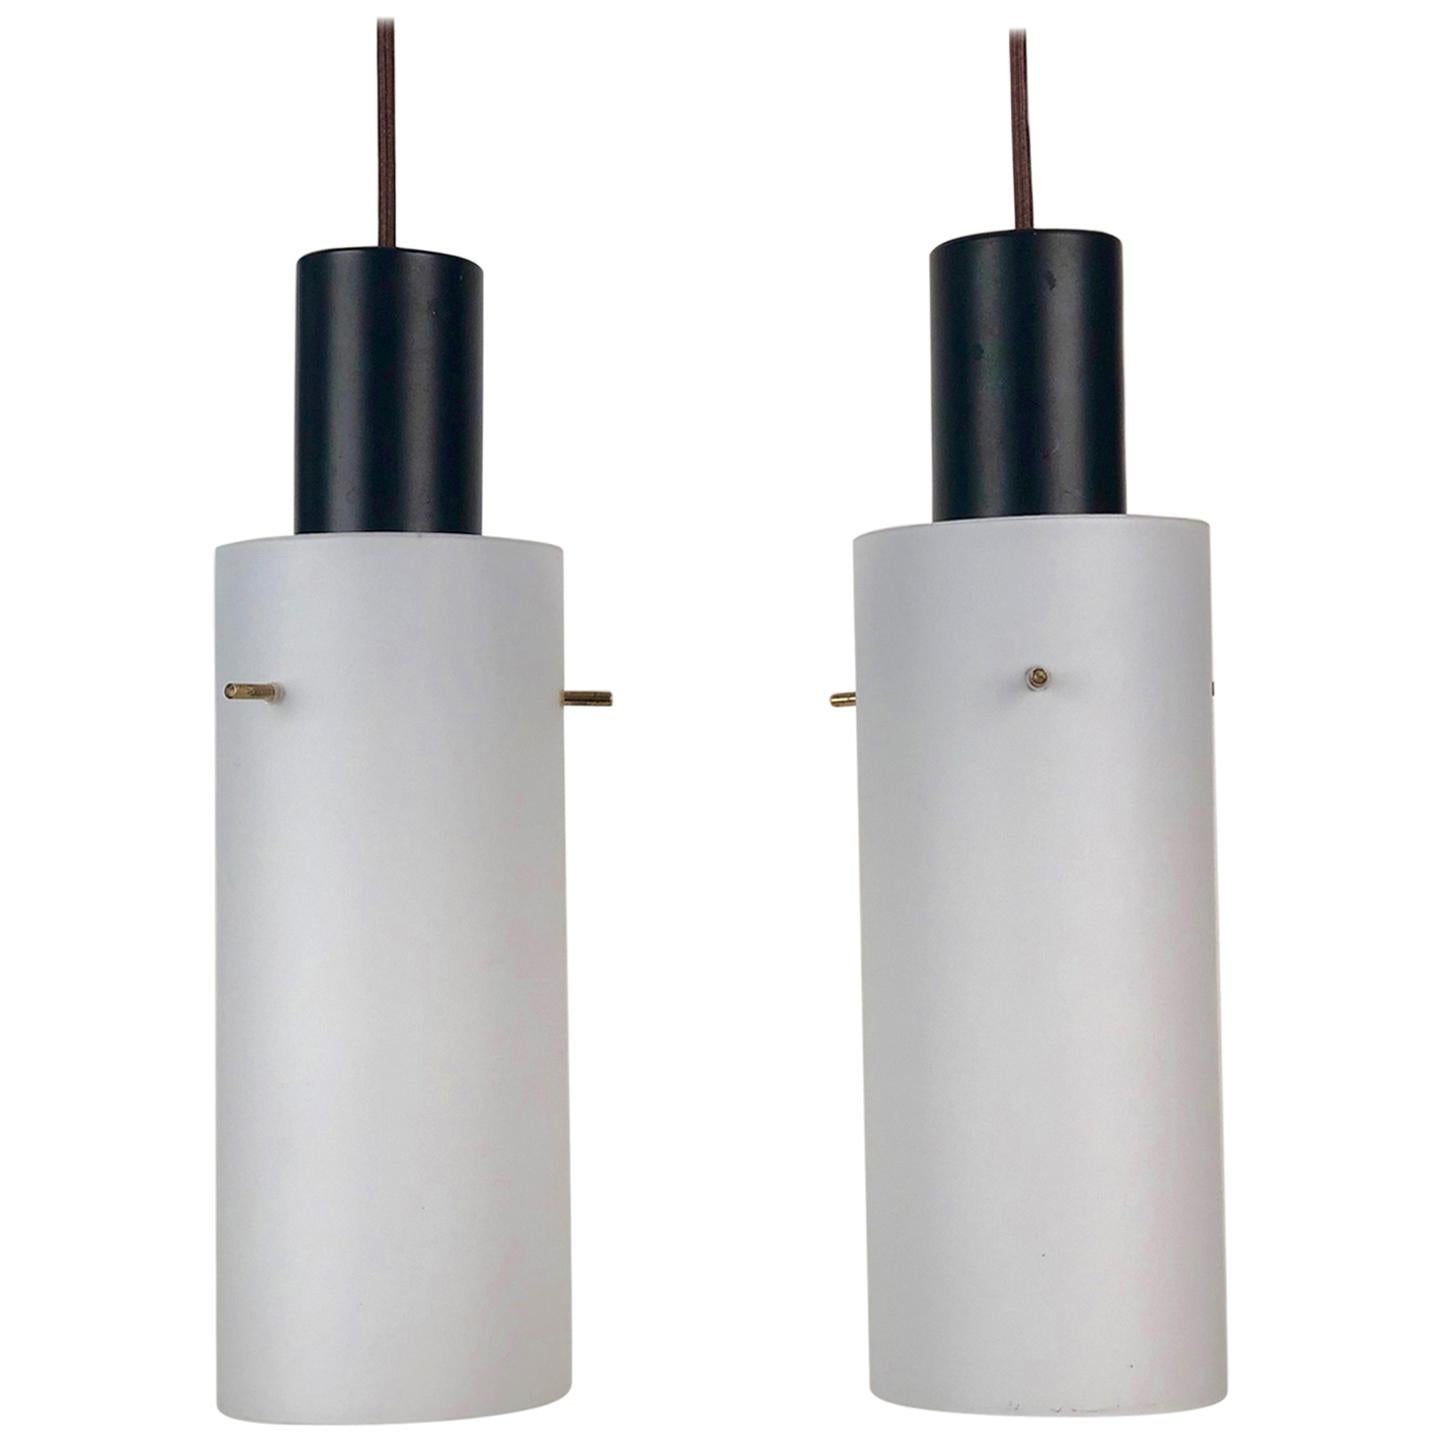 Pair of Cylindrical Hanging Pendant Lights from West, Made in Austria, 1970s